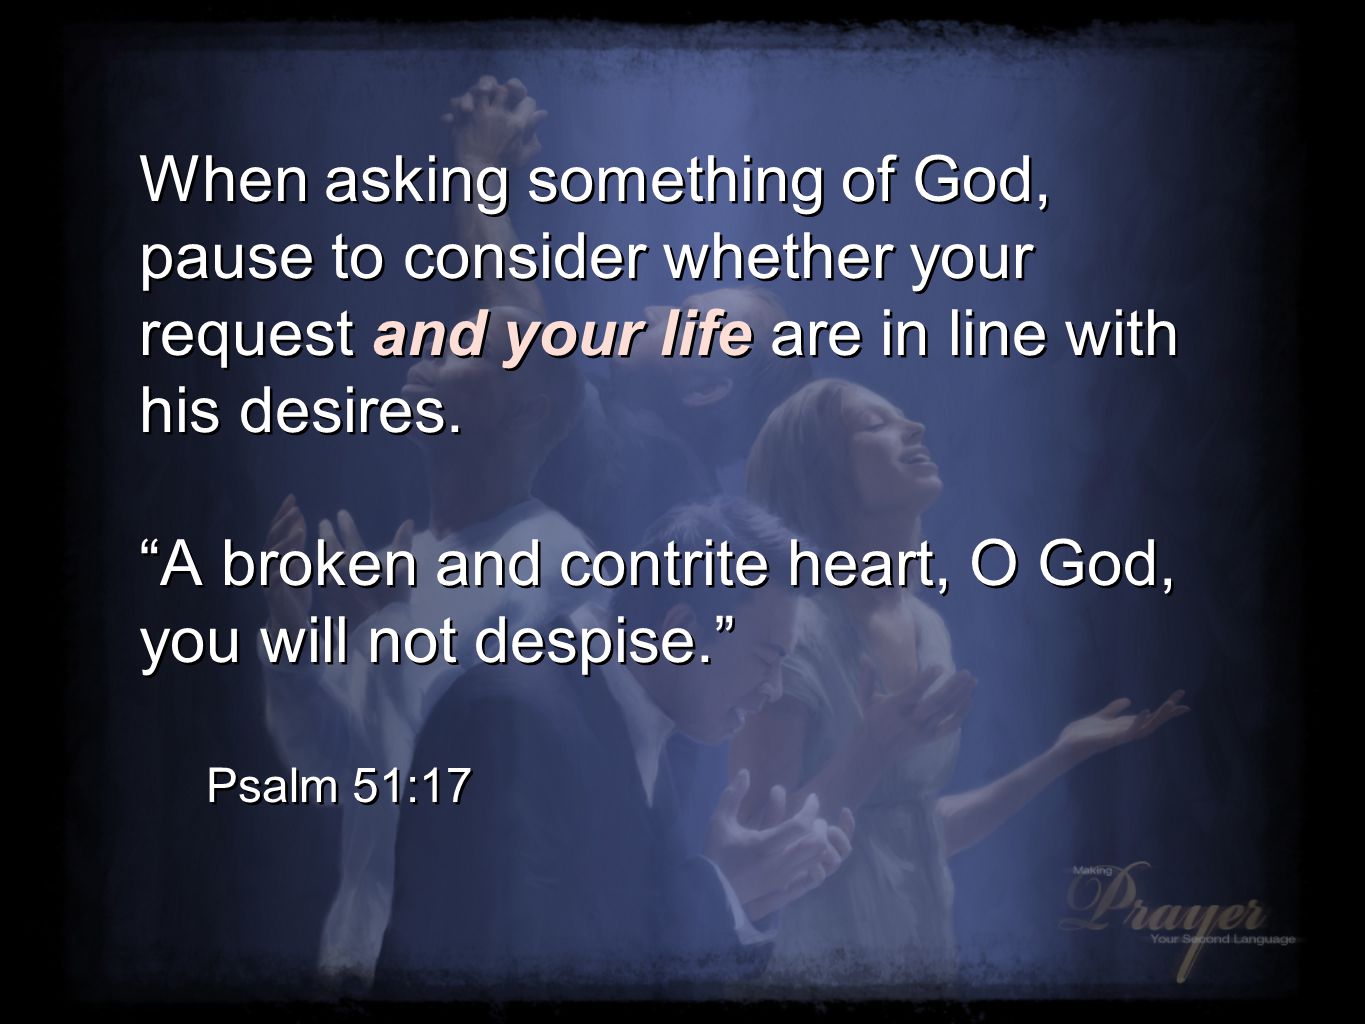 When asking something of God, pause to consider whether your request and your life are in line with his desires.